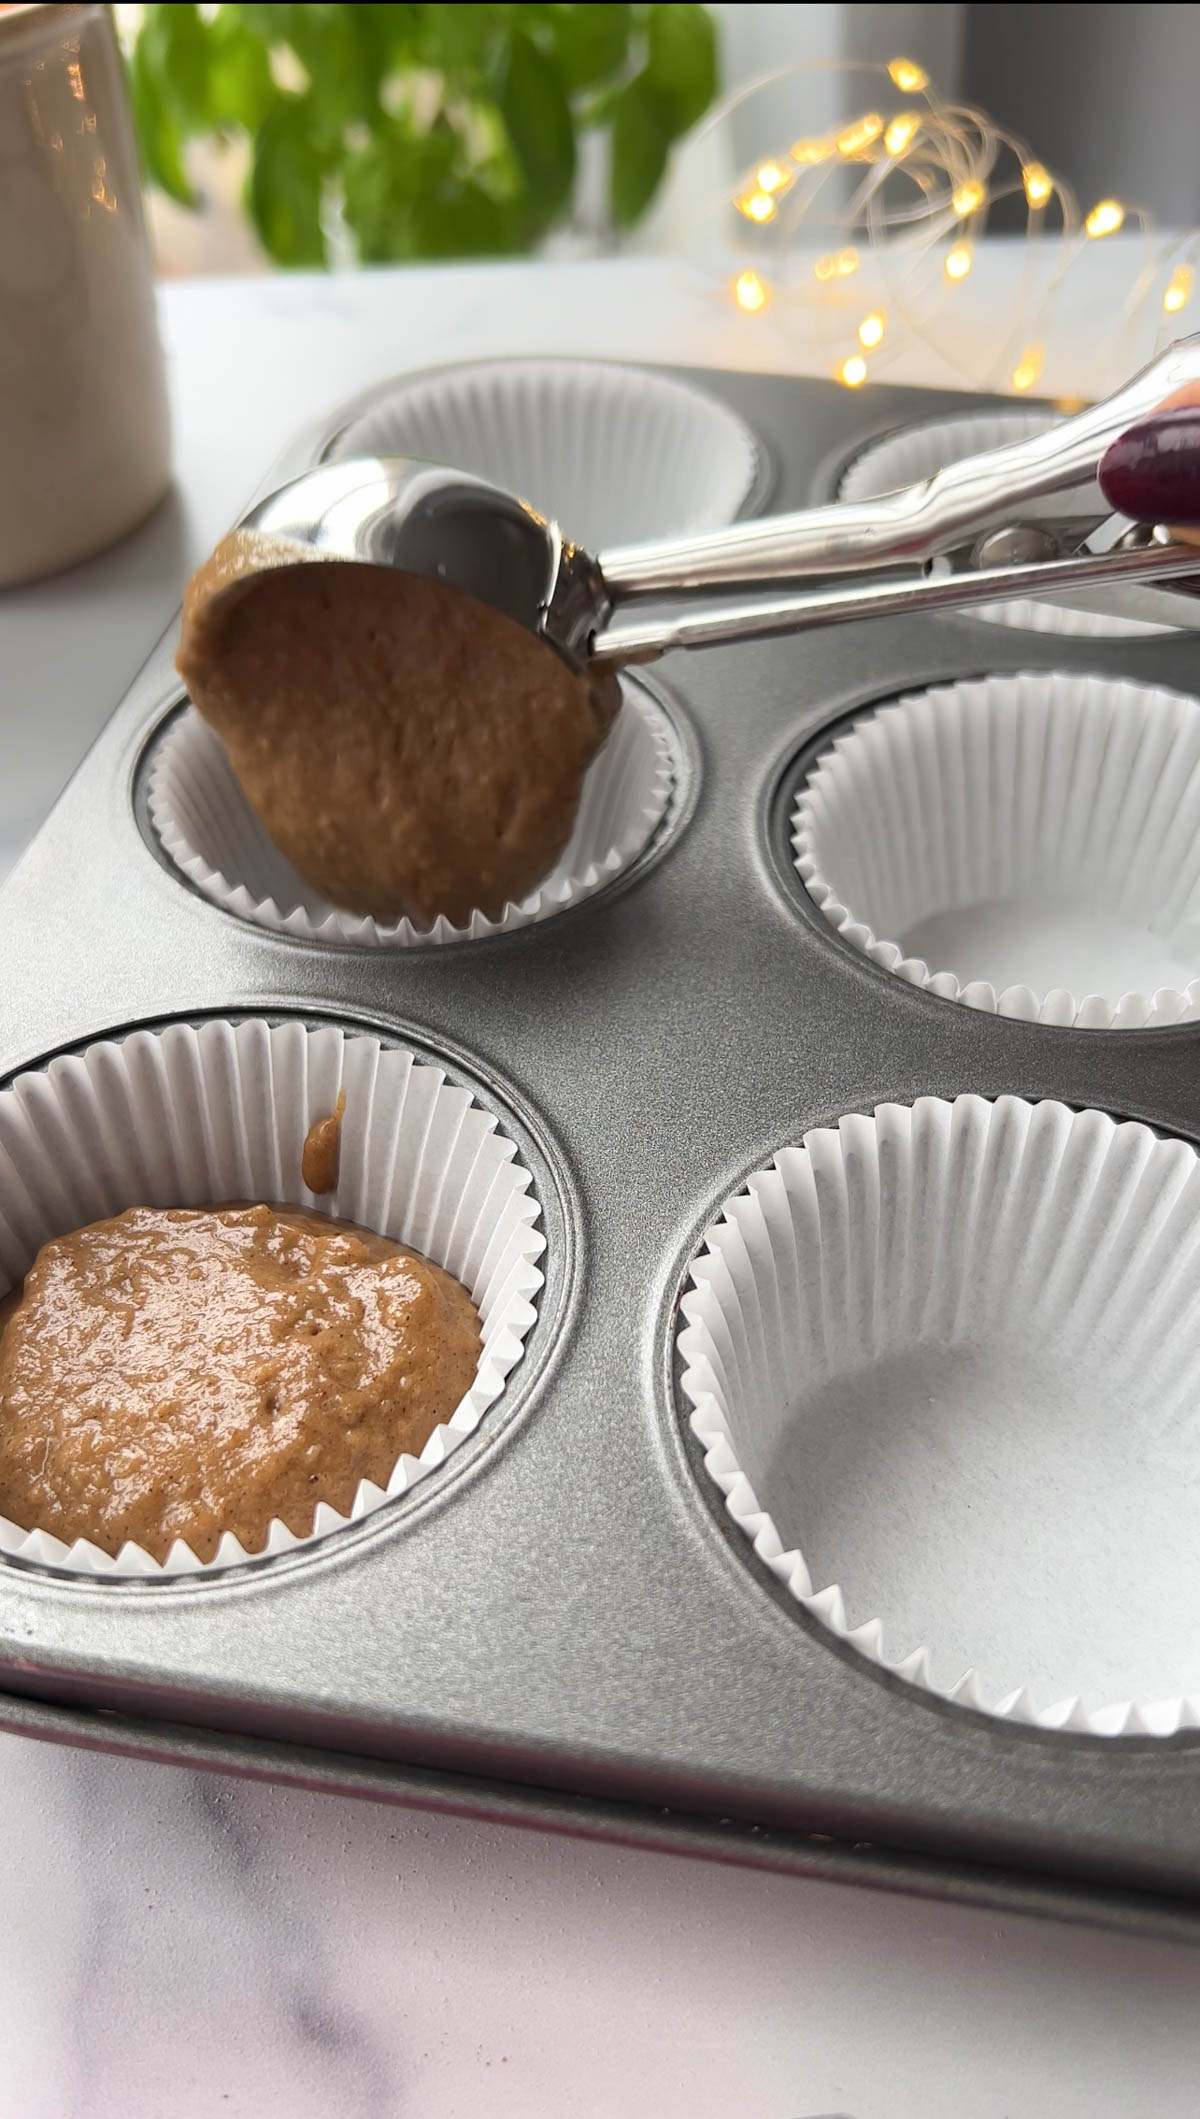 pouring gingerbread batter into cupcake molds